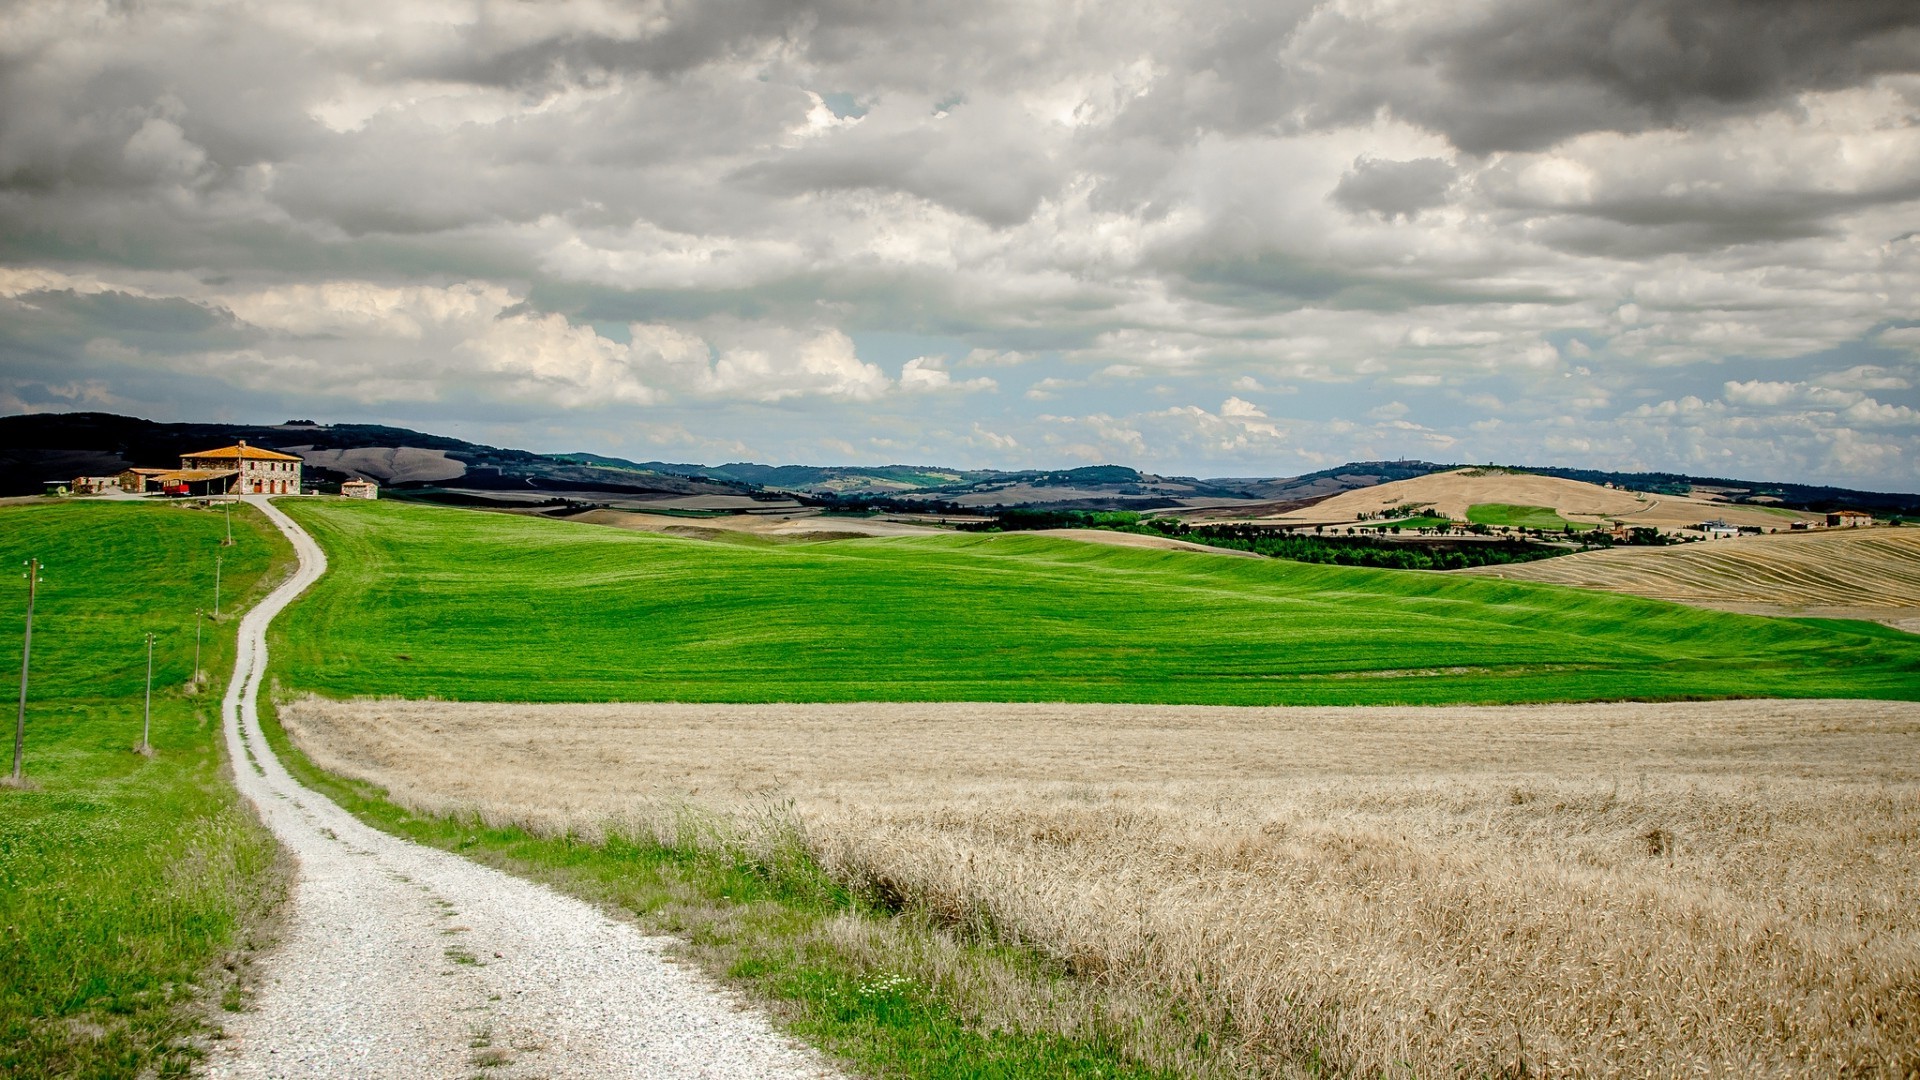 nature, Landscape, Clouds, Trees, Field, Tuscany, Italy, Grass, Dirt Road, Hills, House Wallpaper